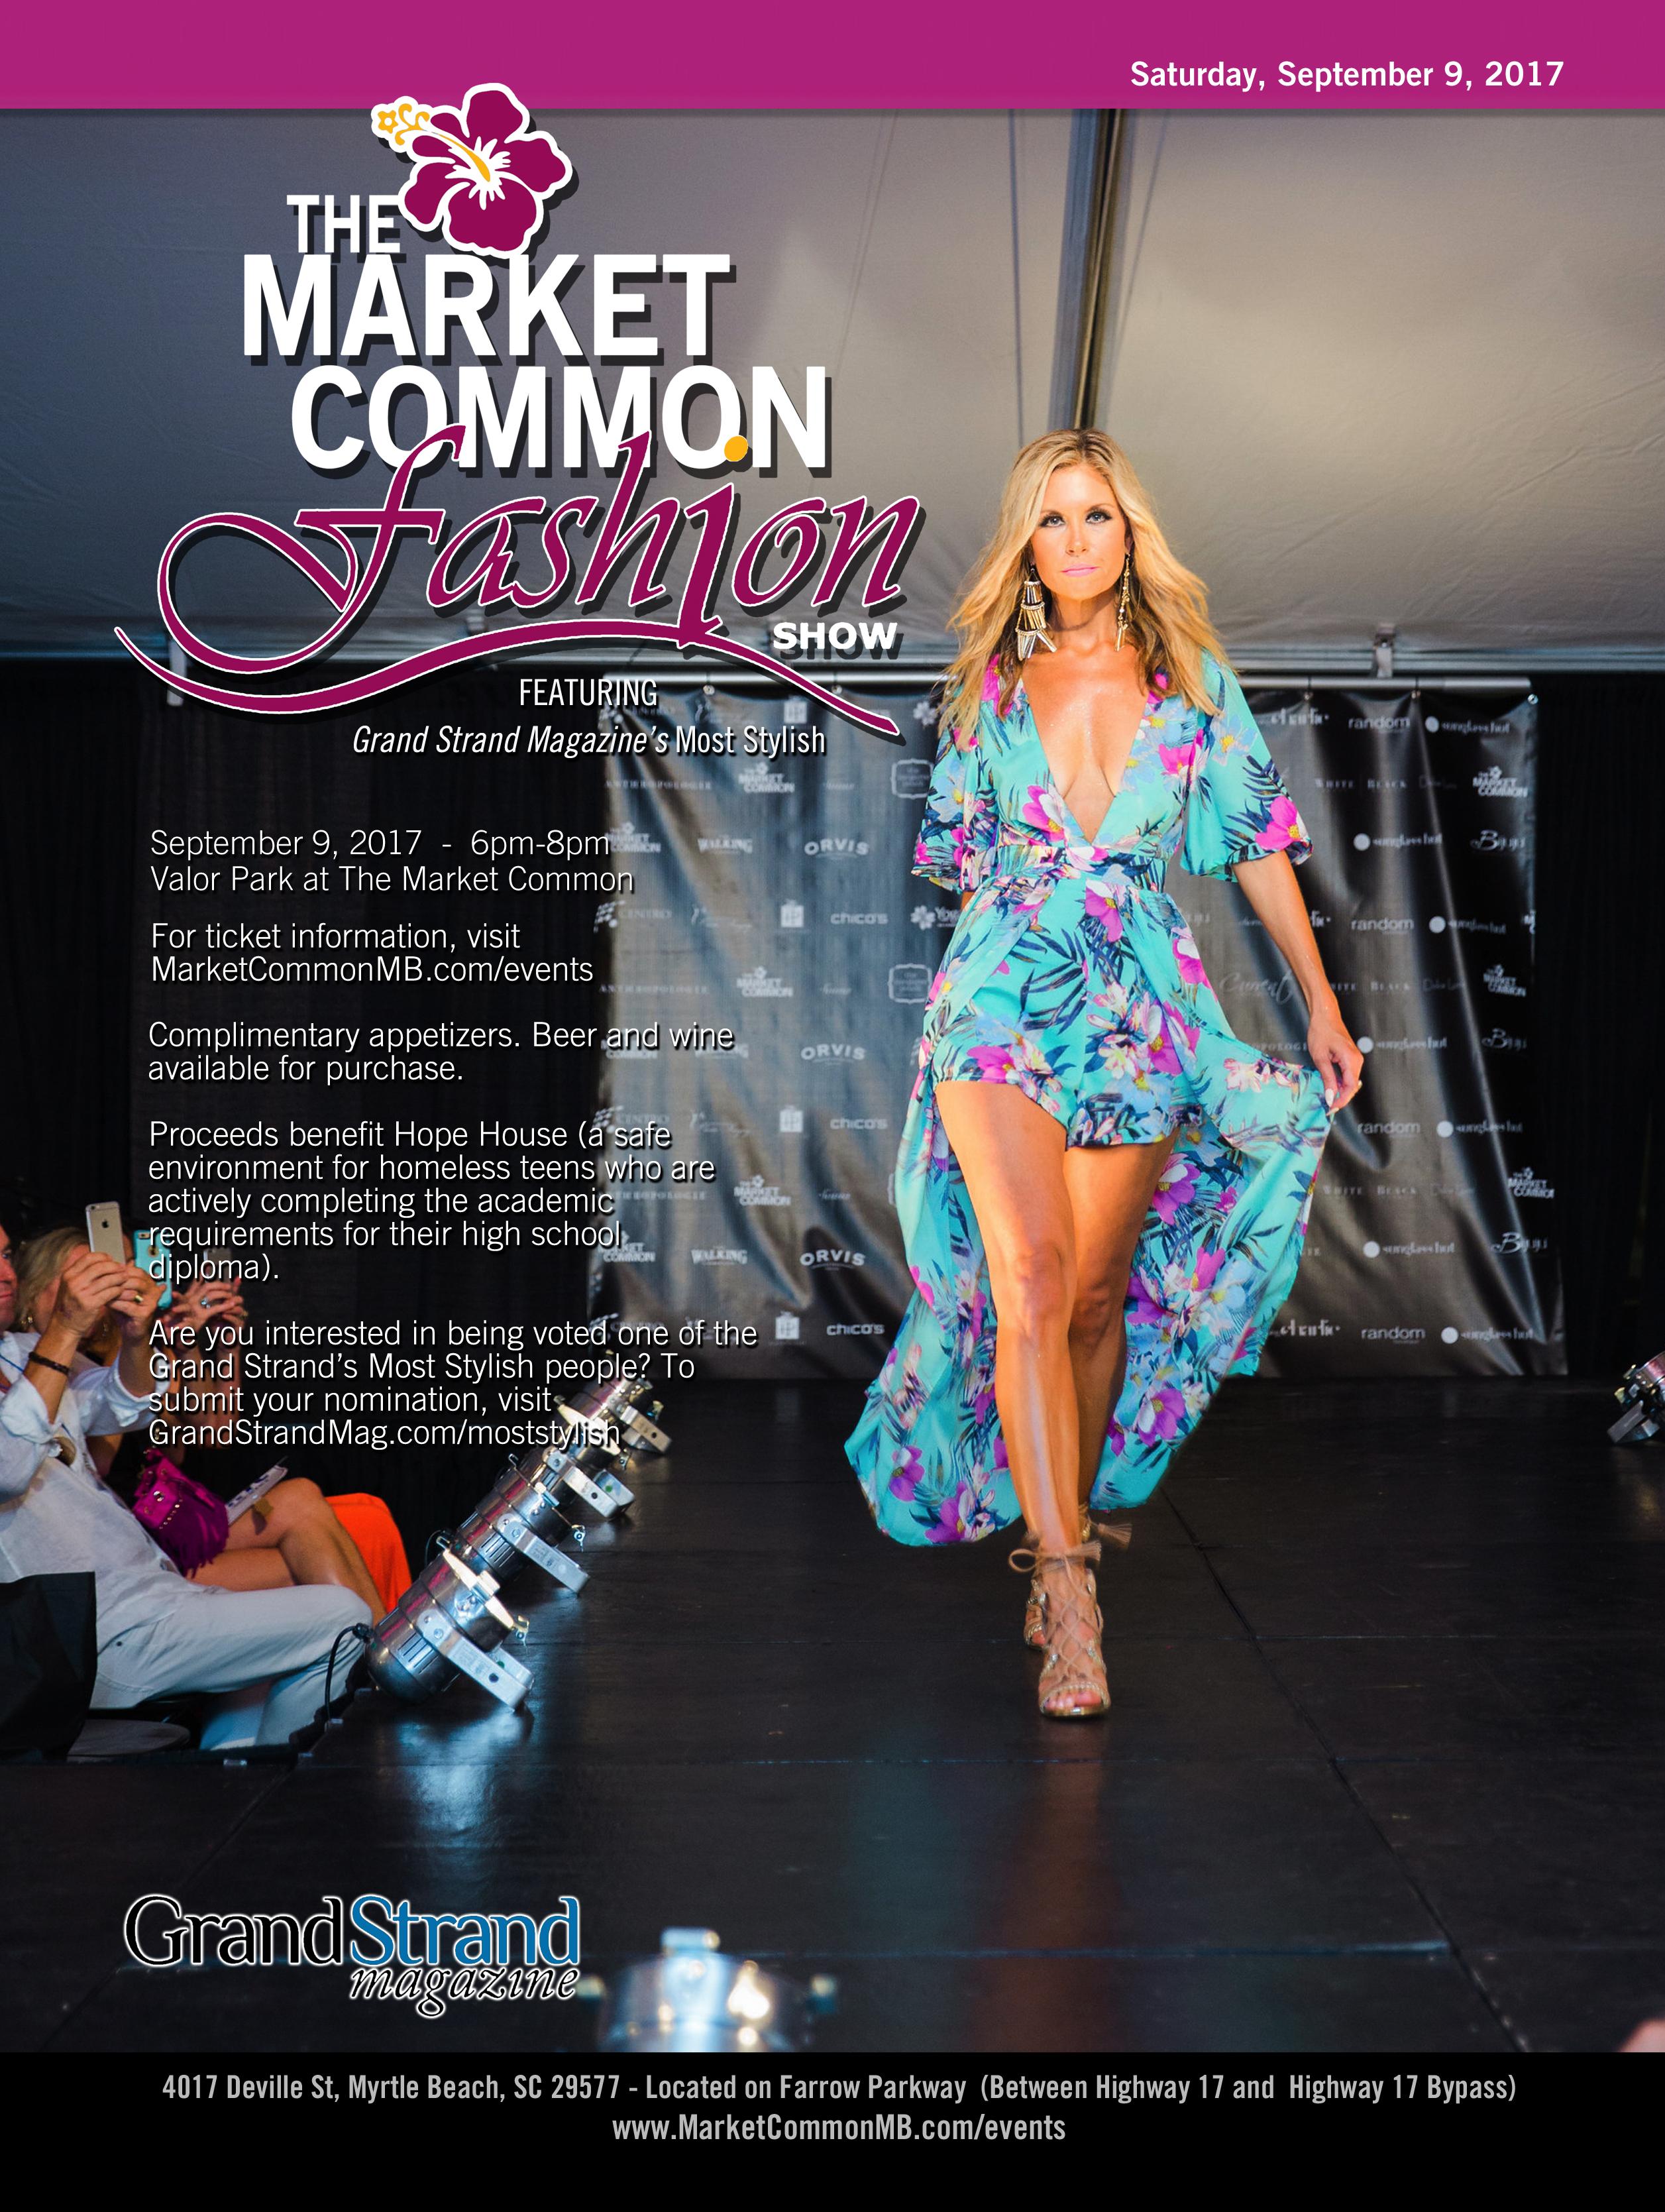 2nd Annual Market Common Fashion Show featuring Grand Strand Magazine's Most Stylish